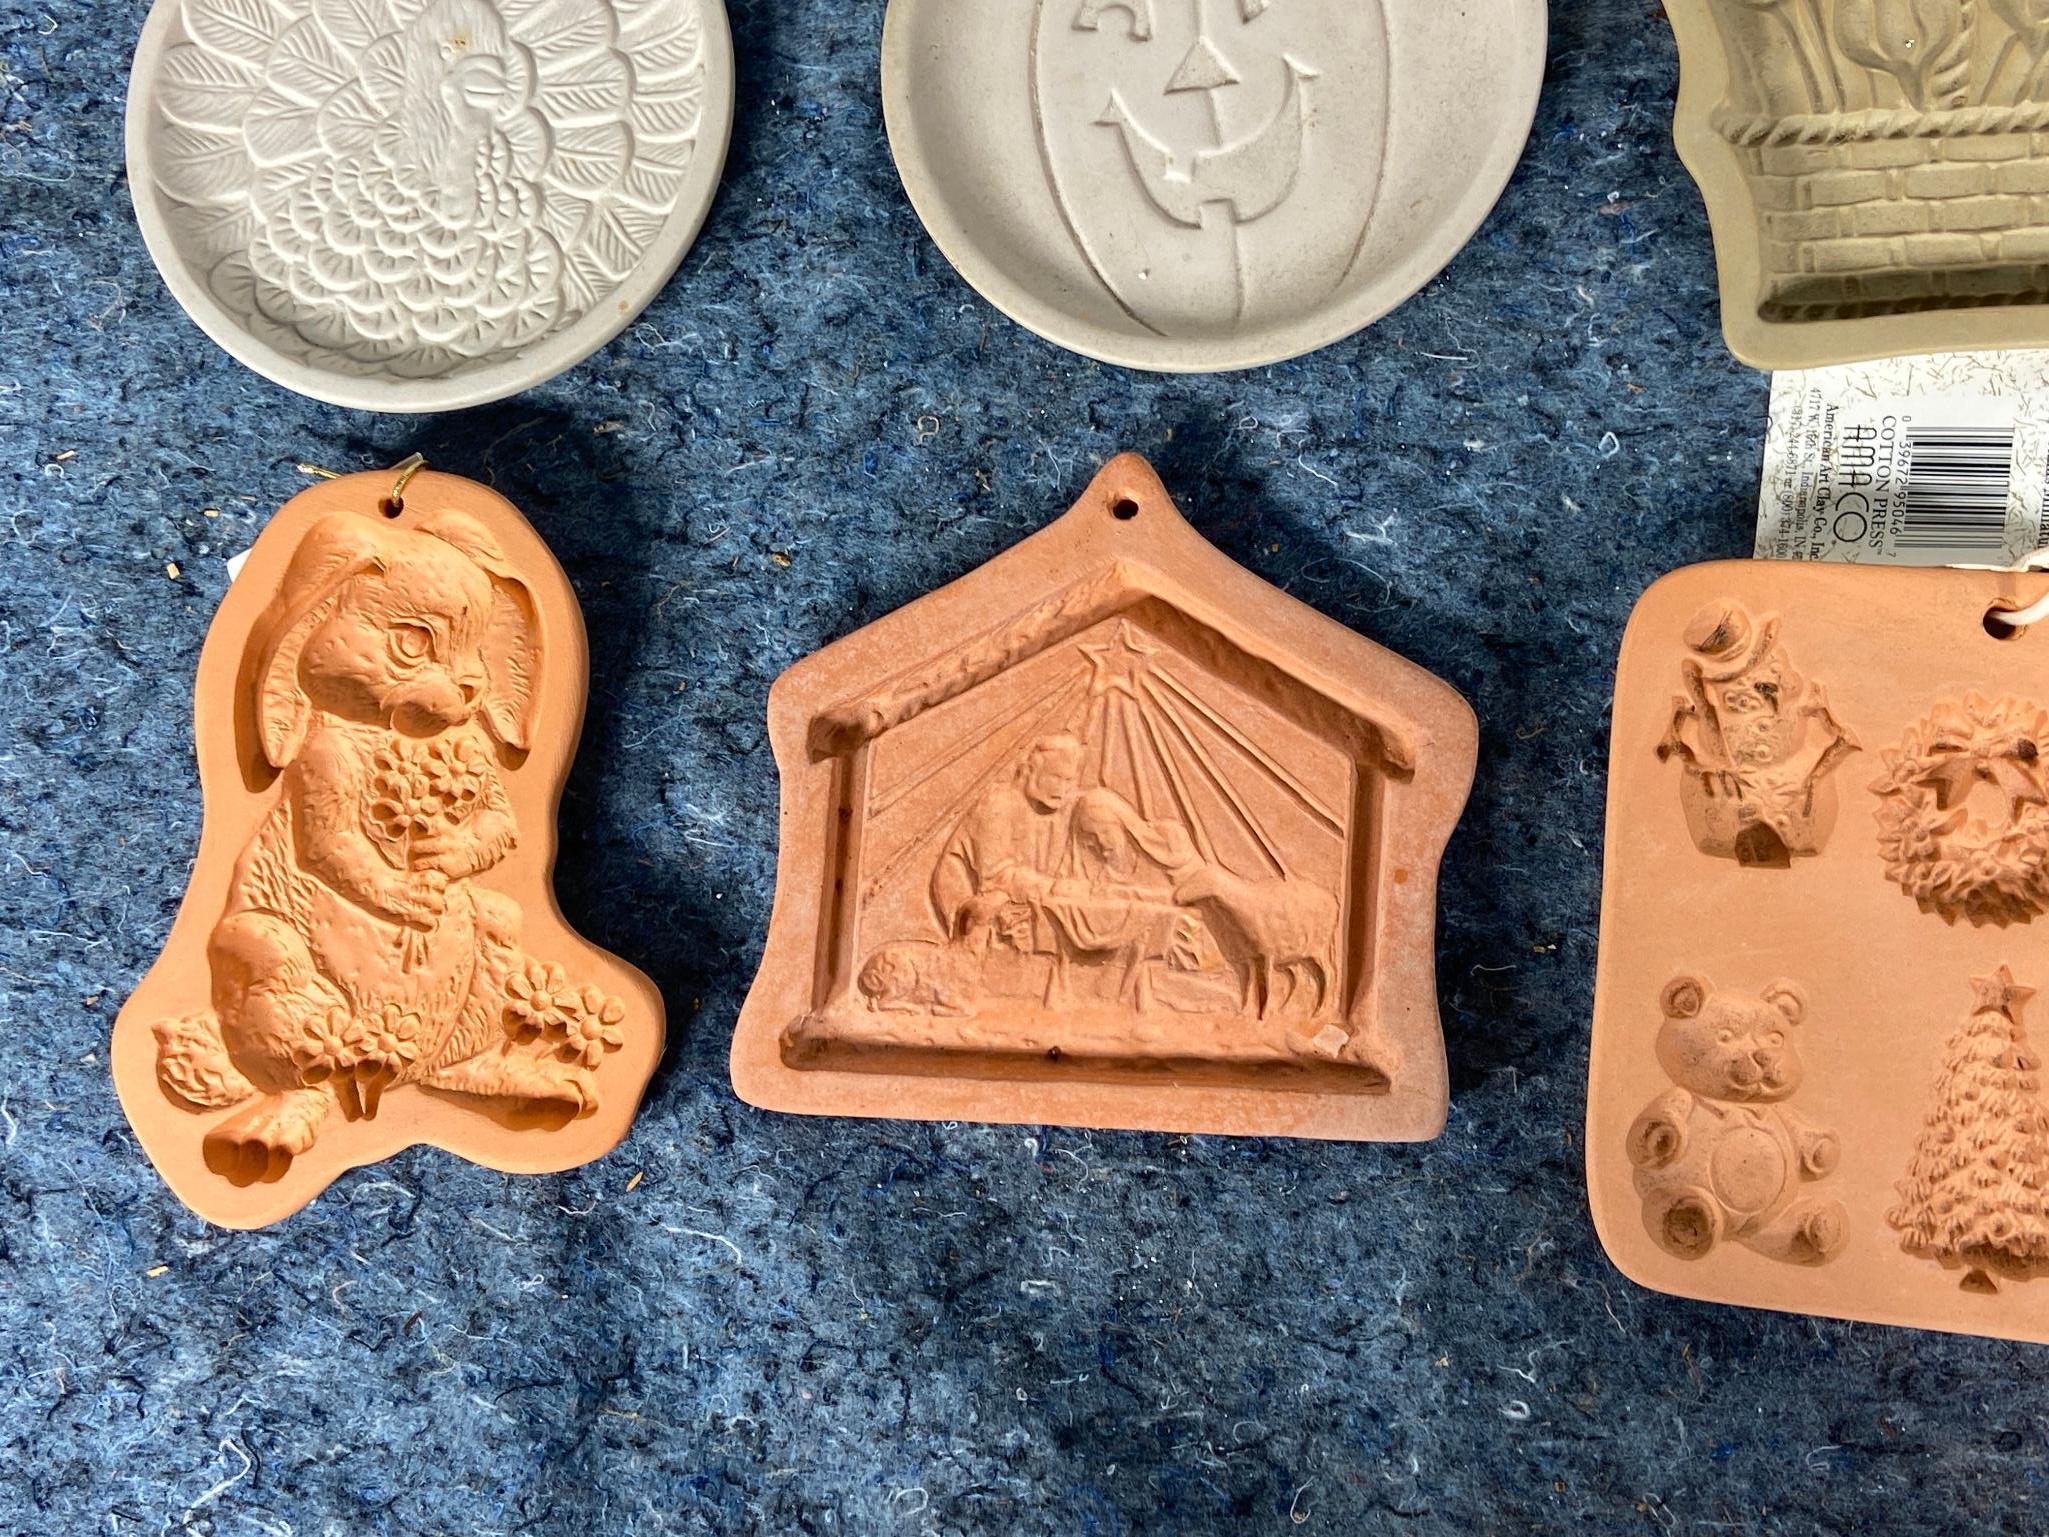 10 Vintage Cookie Molds including, Pumpkin, Dog, Bunny, Christmas, Turkey, and More